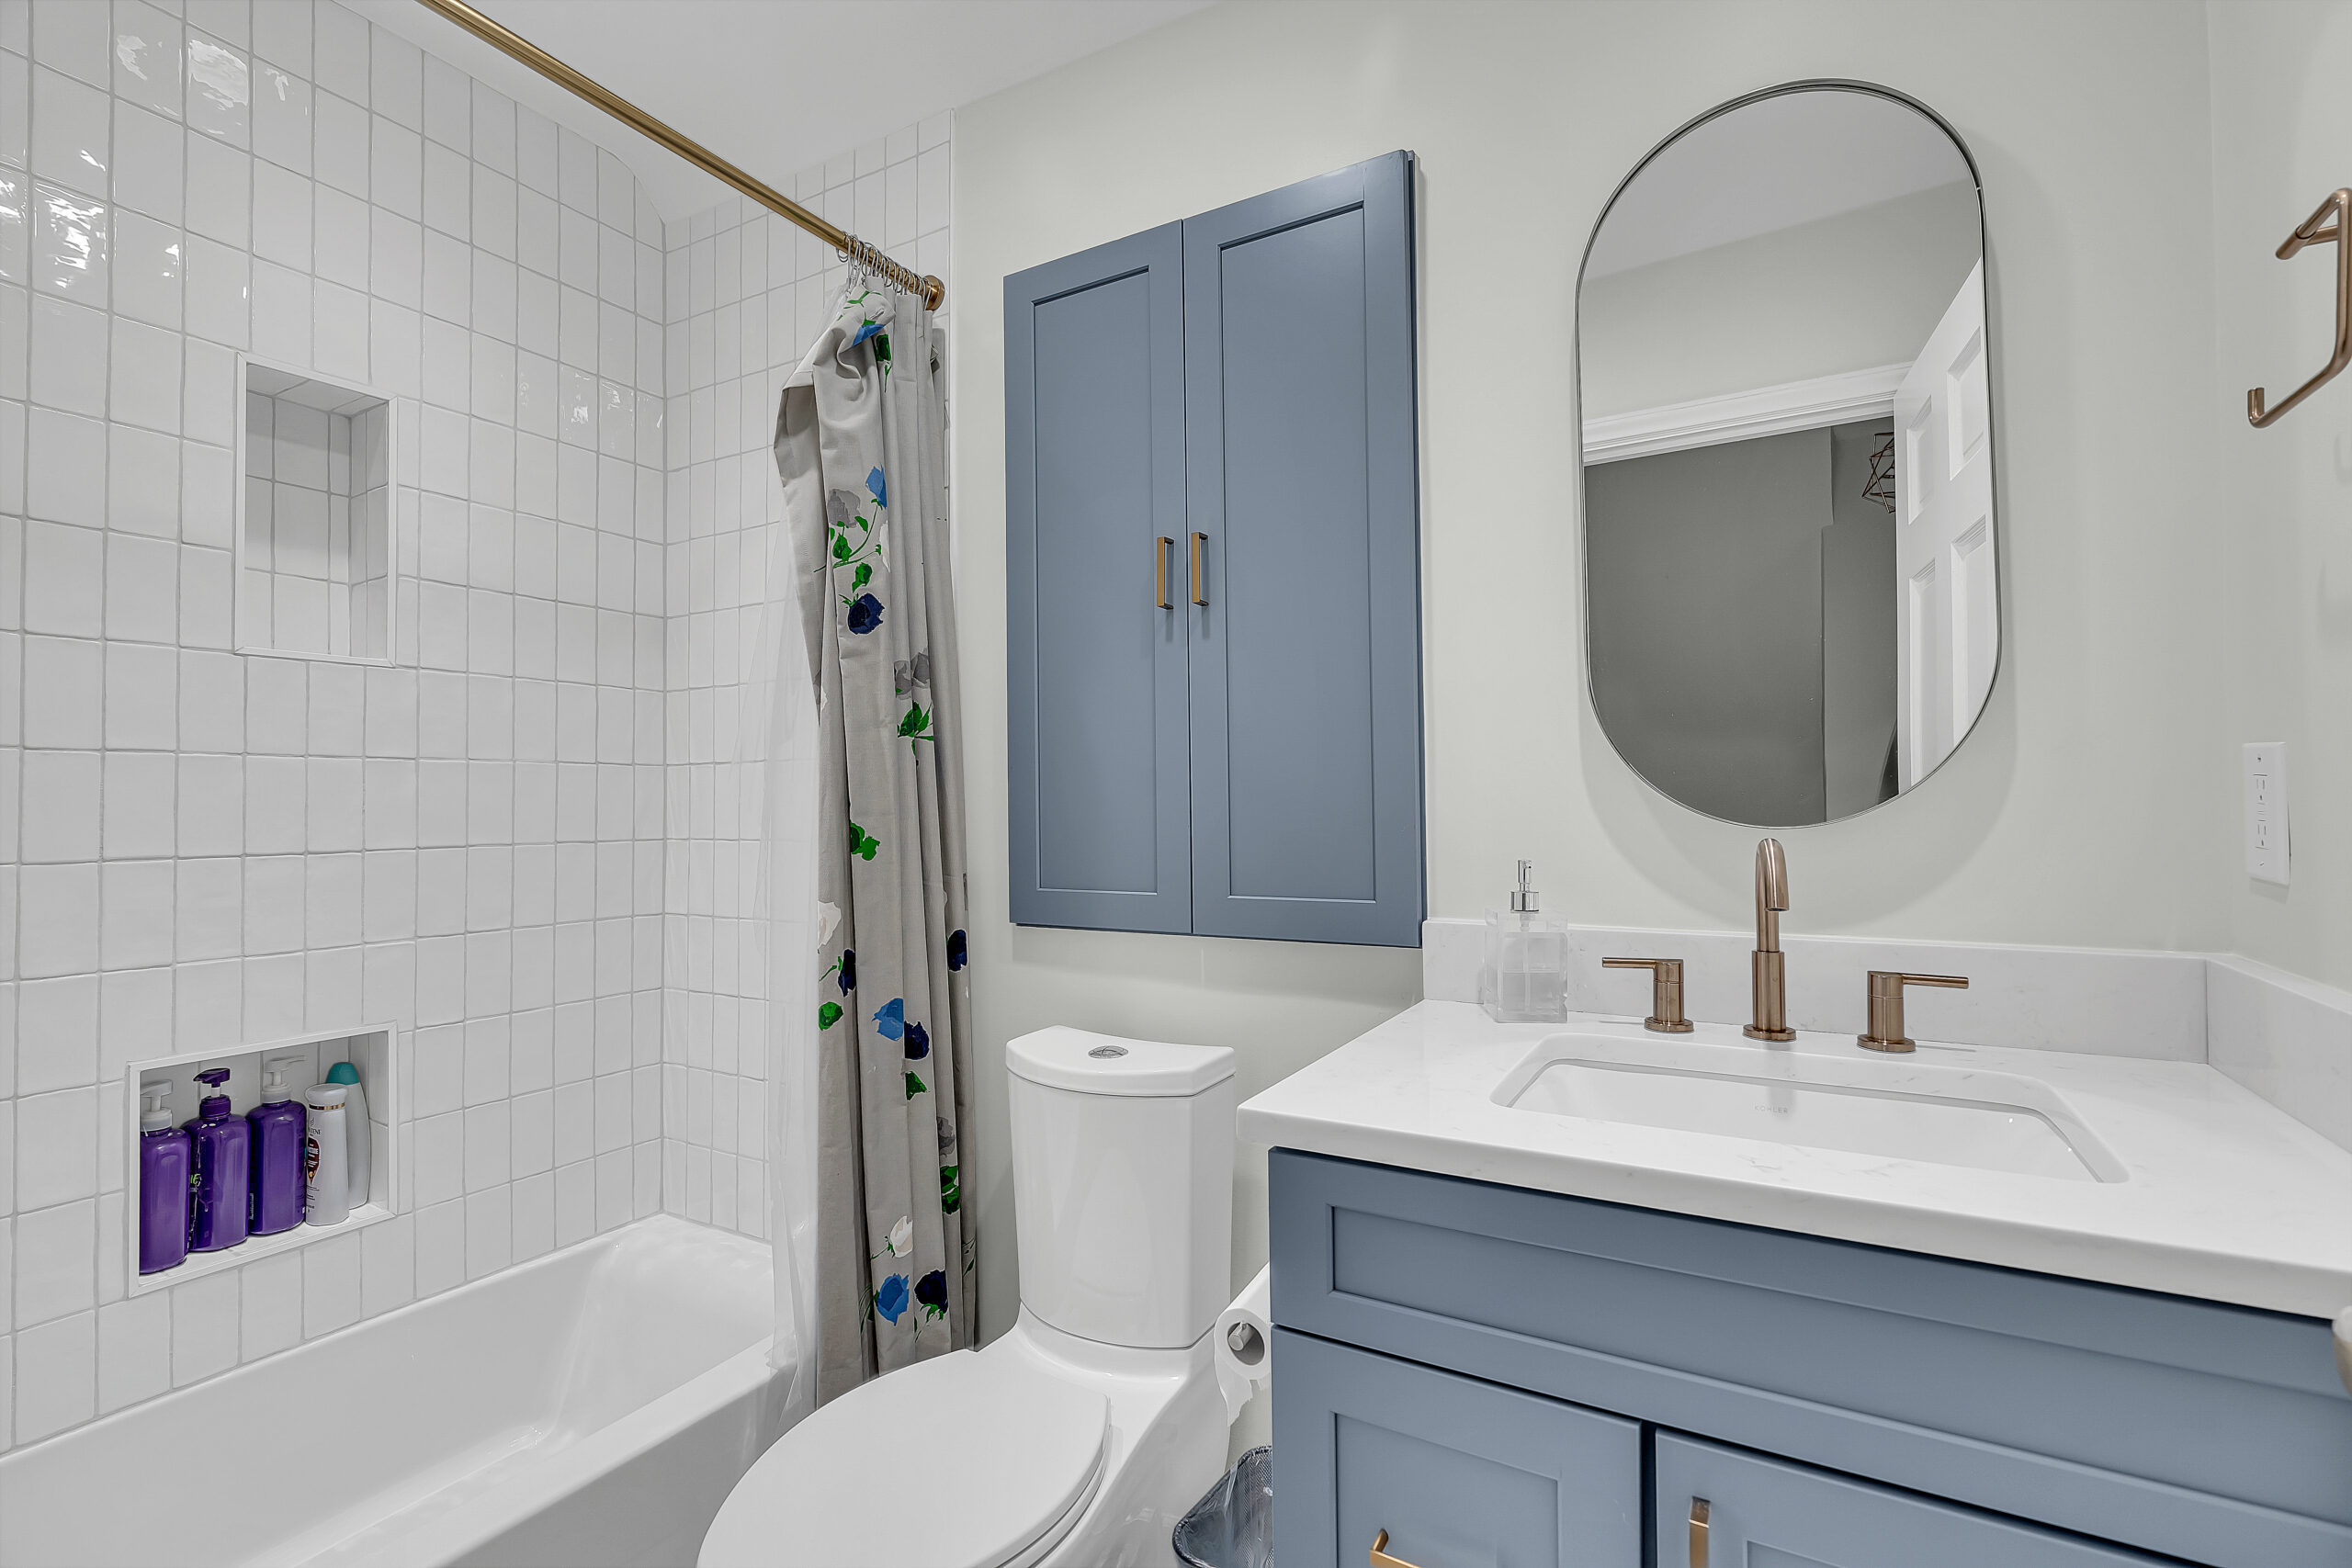 Small bathroom style with light grey vanity, toilet, and a bath tub